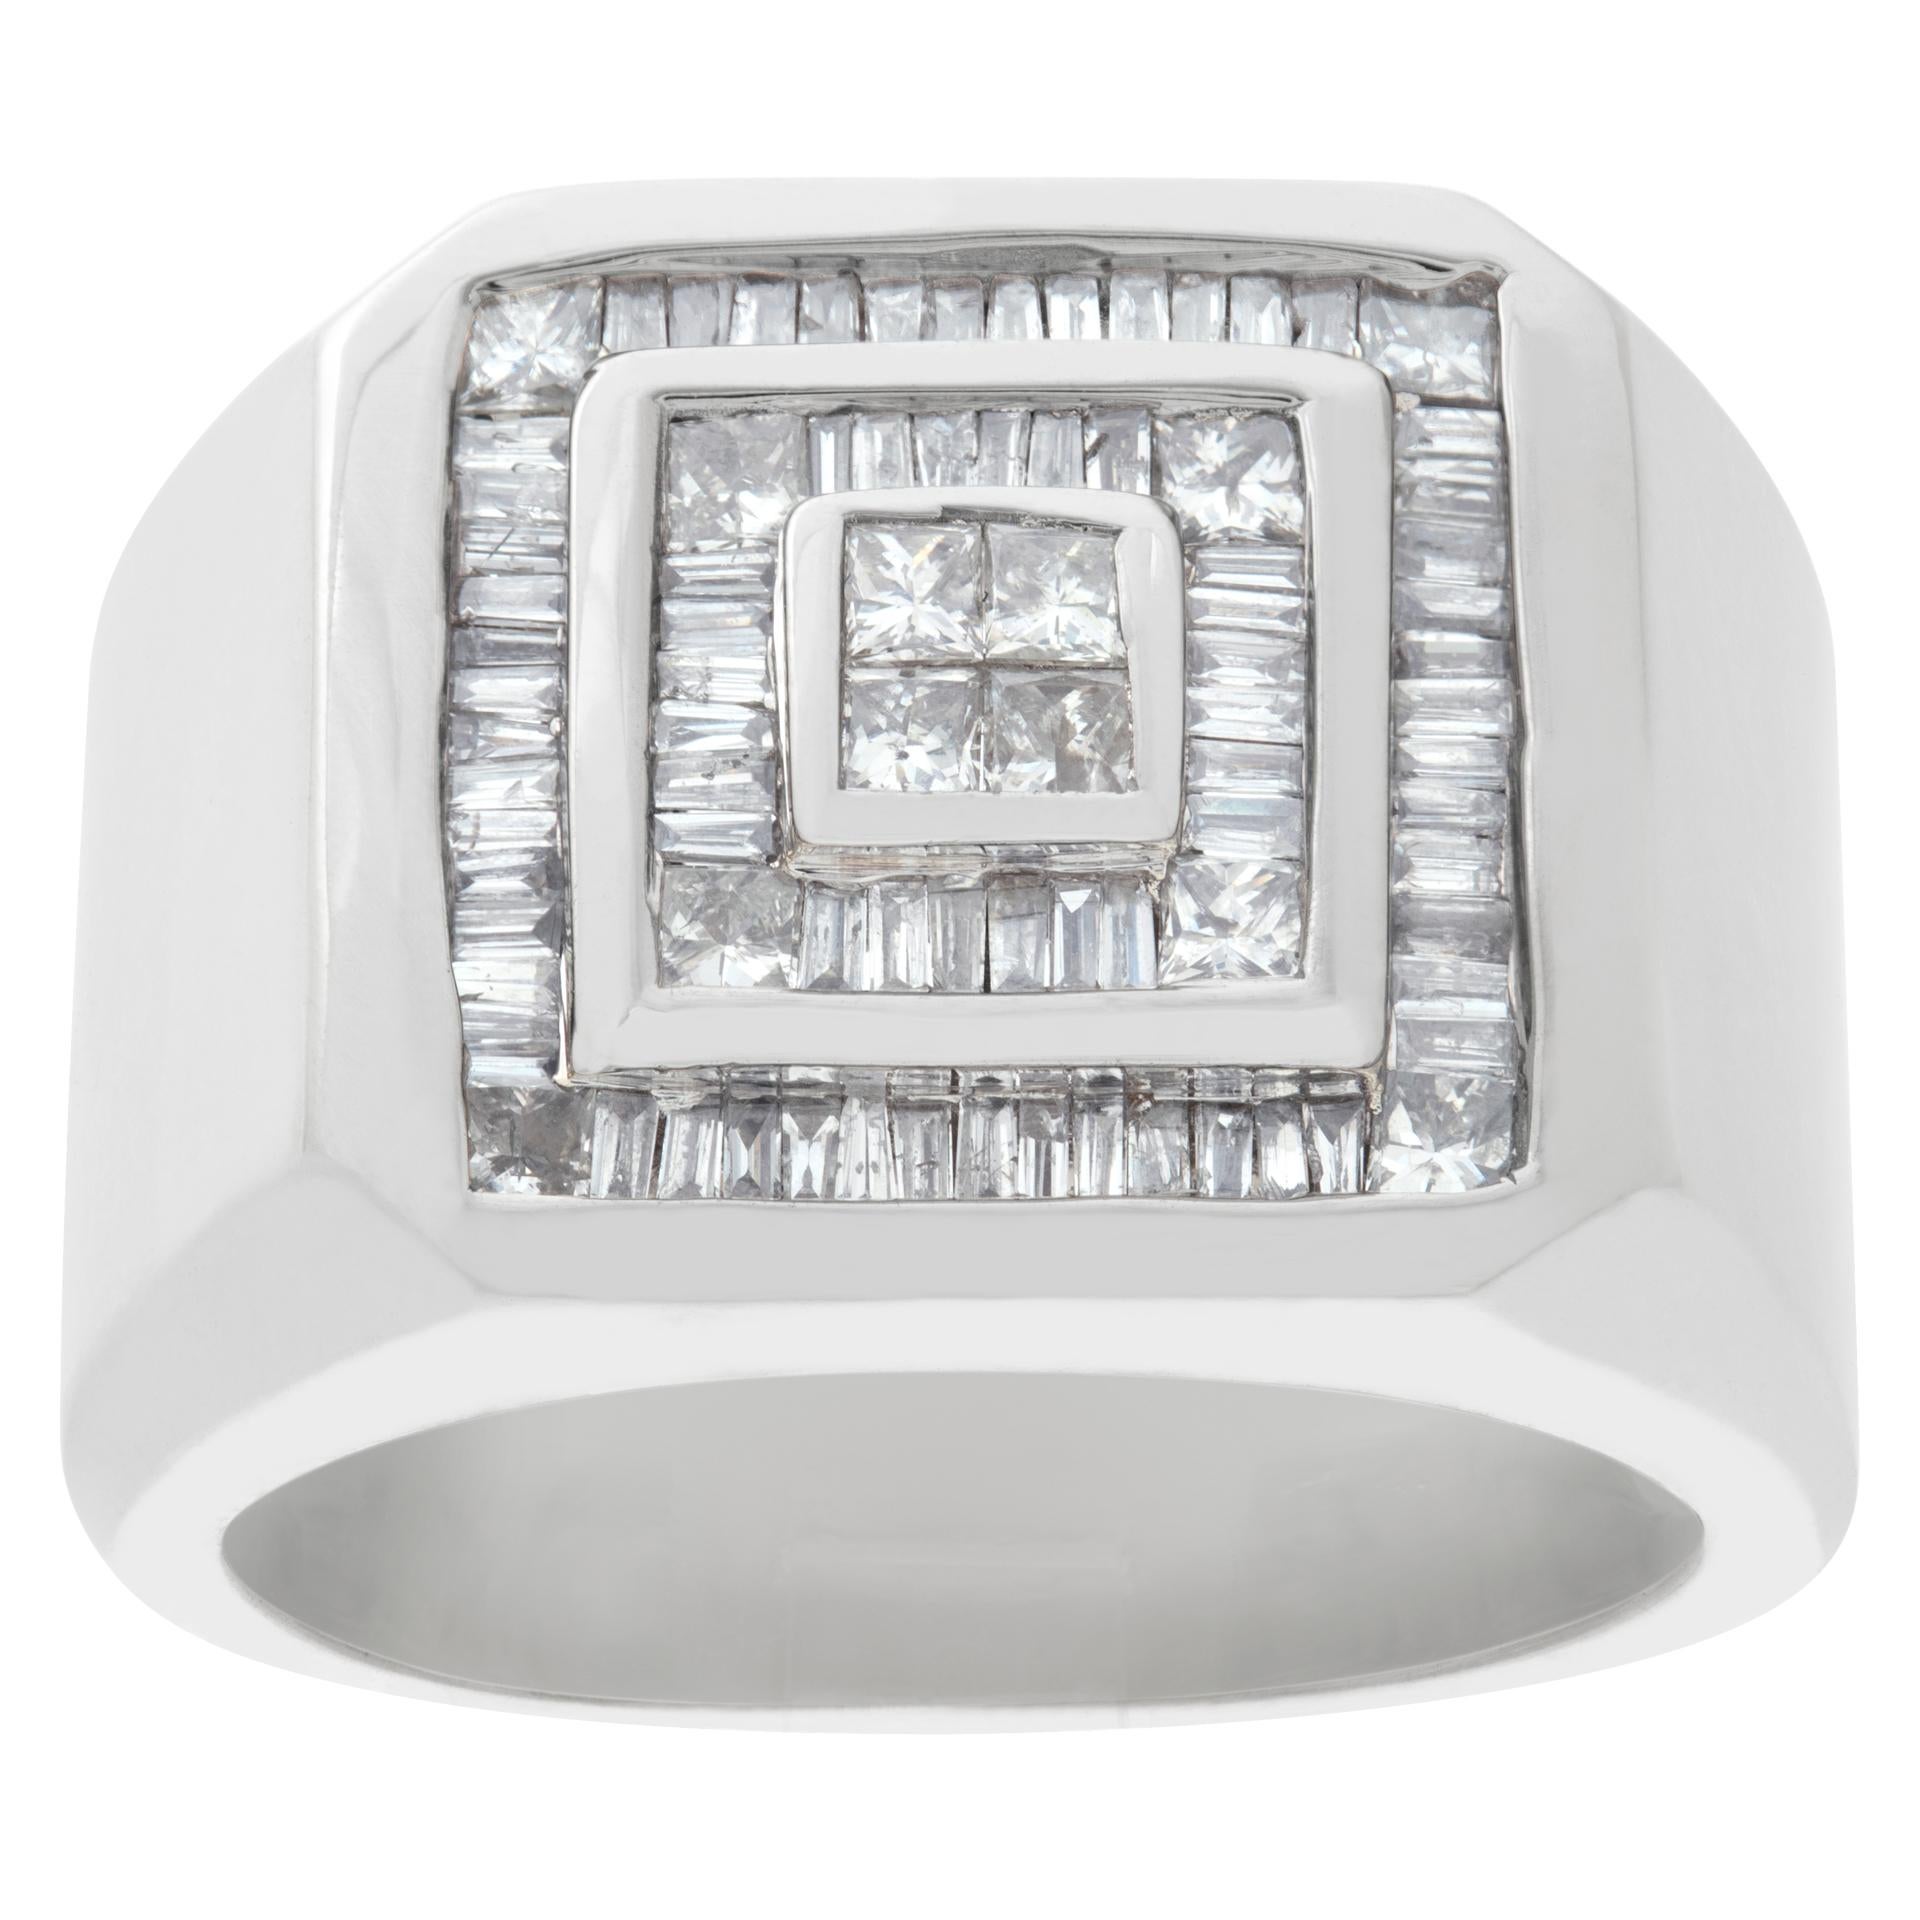 Baguette and princess cut diamond ring in 14k white gold with approximately 1.80 carats in diamonds. Ring size 8.5. Width tapers from 16mm to 8mm.This Diamond ring is currently size 8.5 and some items can be sized up or down, please ask! It weighs